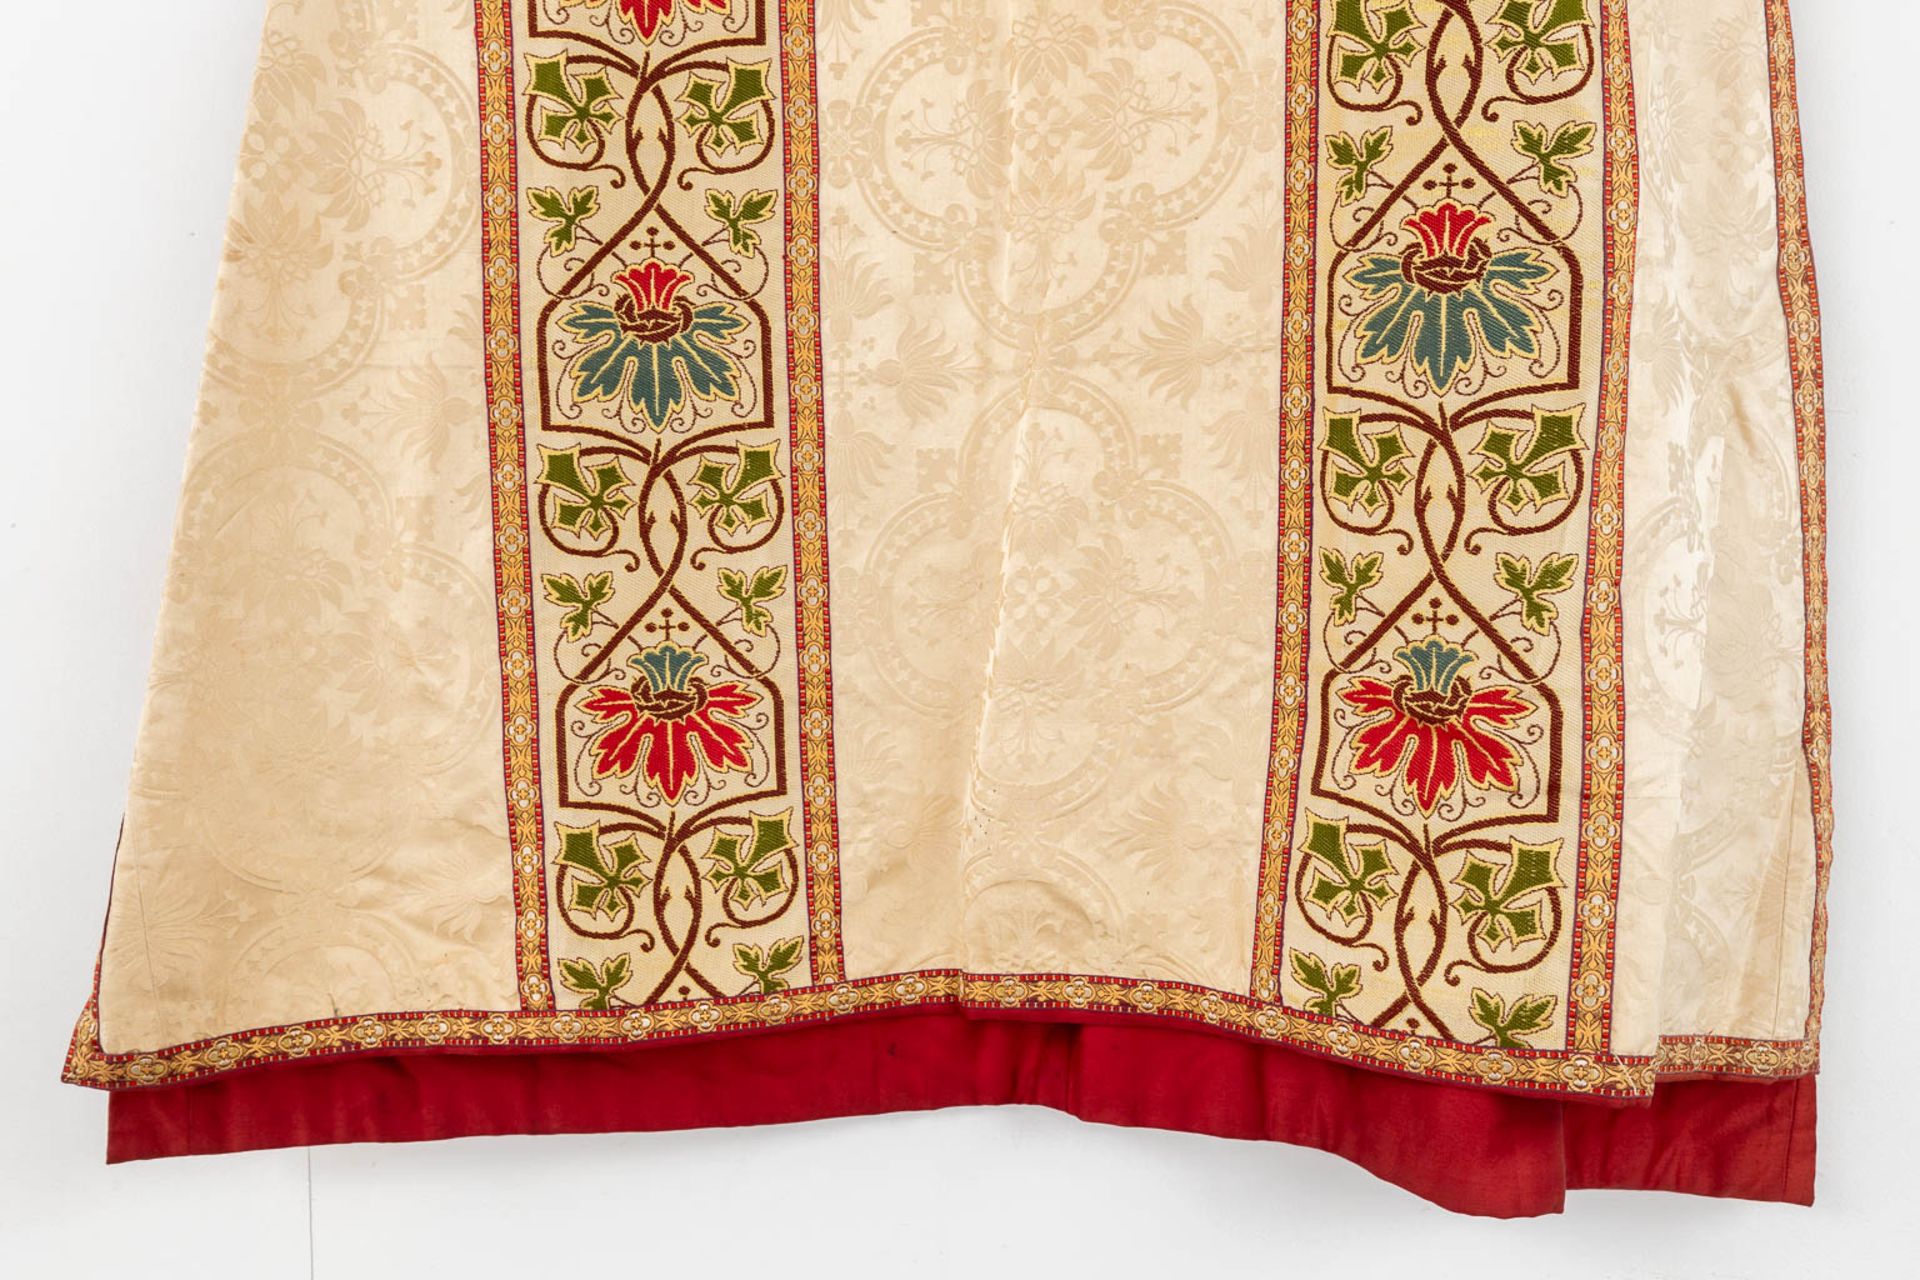 Four Dalmatics, Two Roman Chasubles, A stola and Chalice Veil, finished with embroideries. - Image 11 of 59